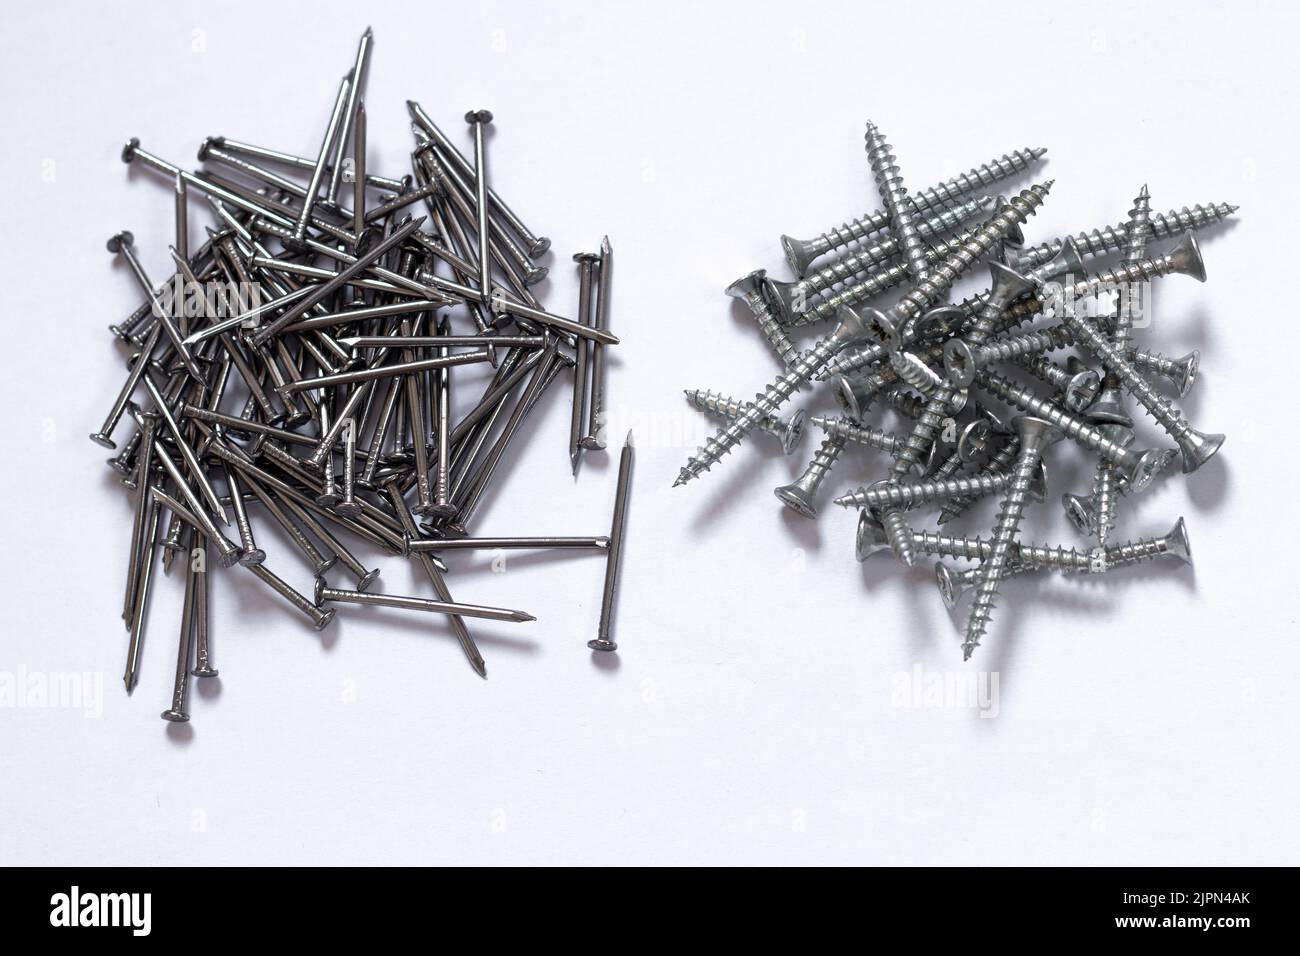 Nails and screws, isolated on white background. Stock Photo